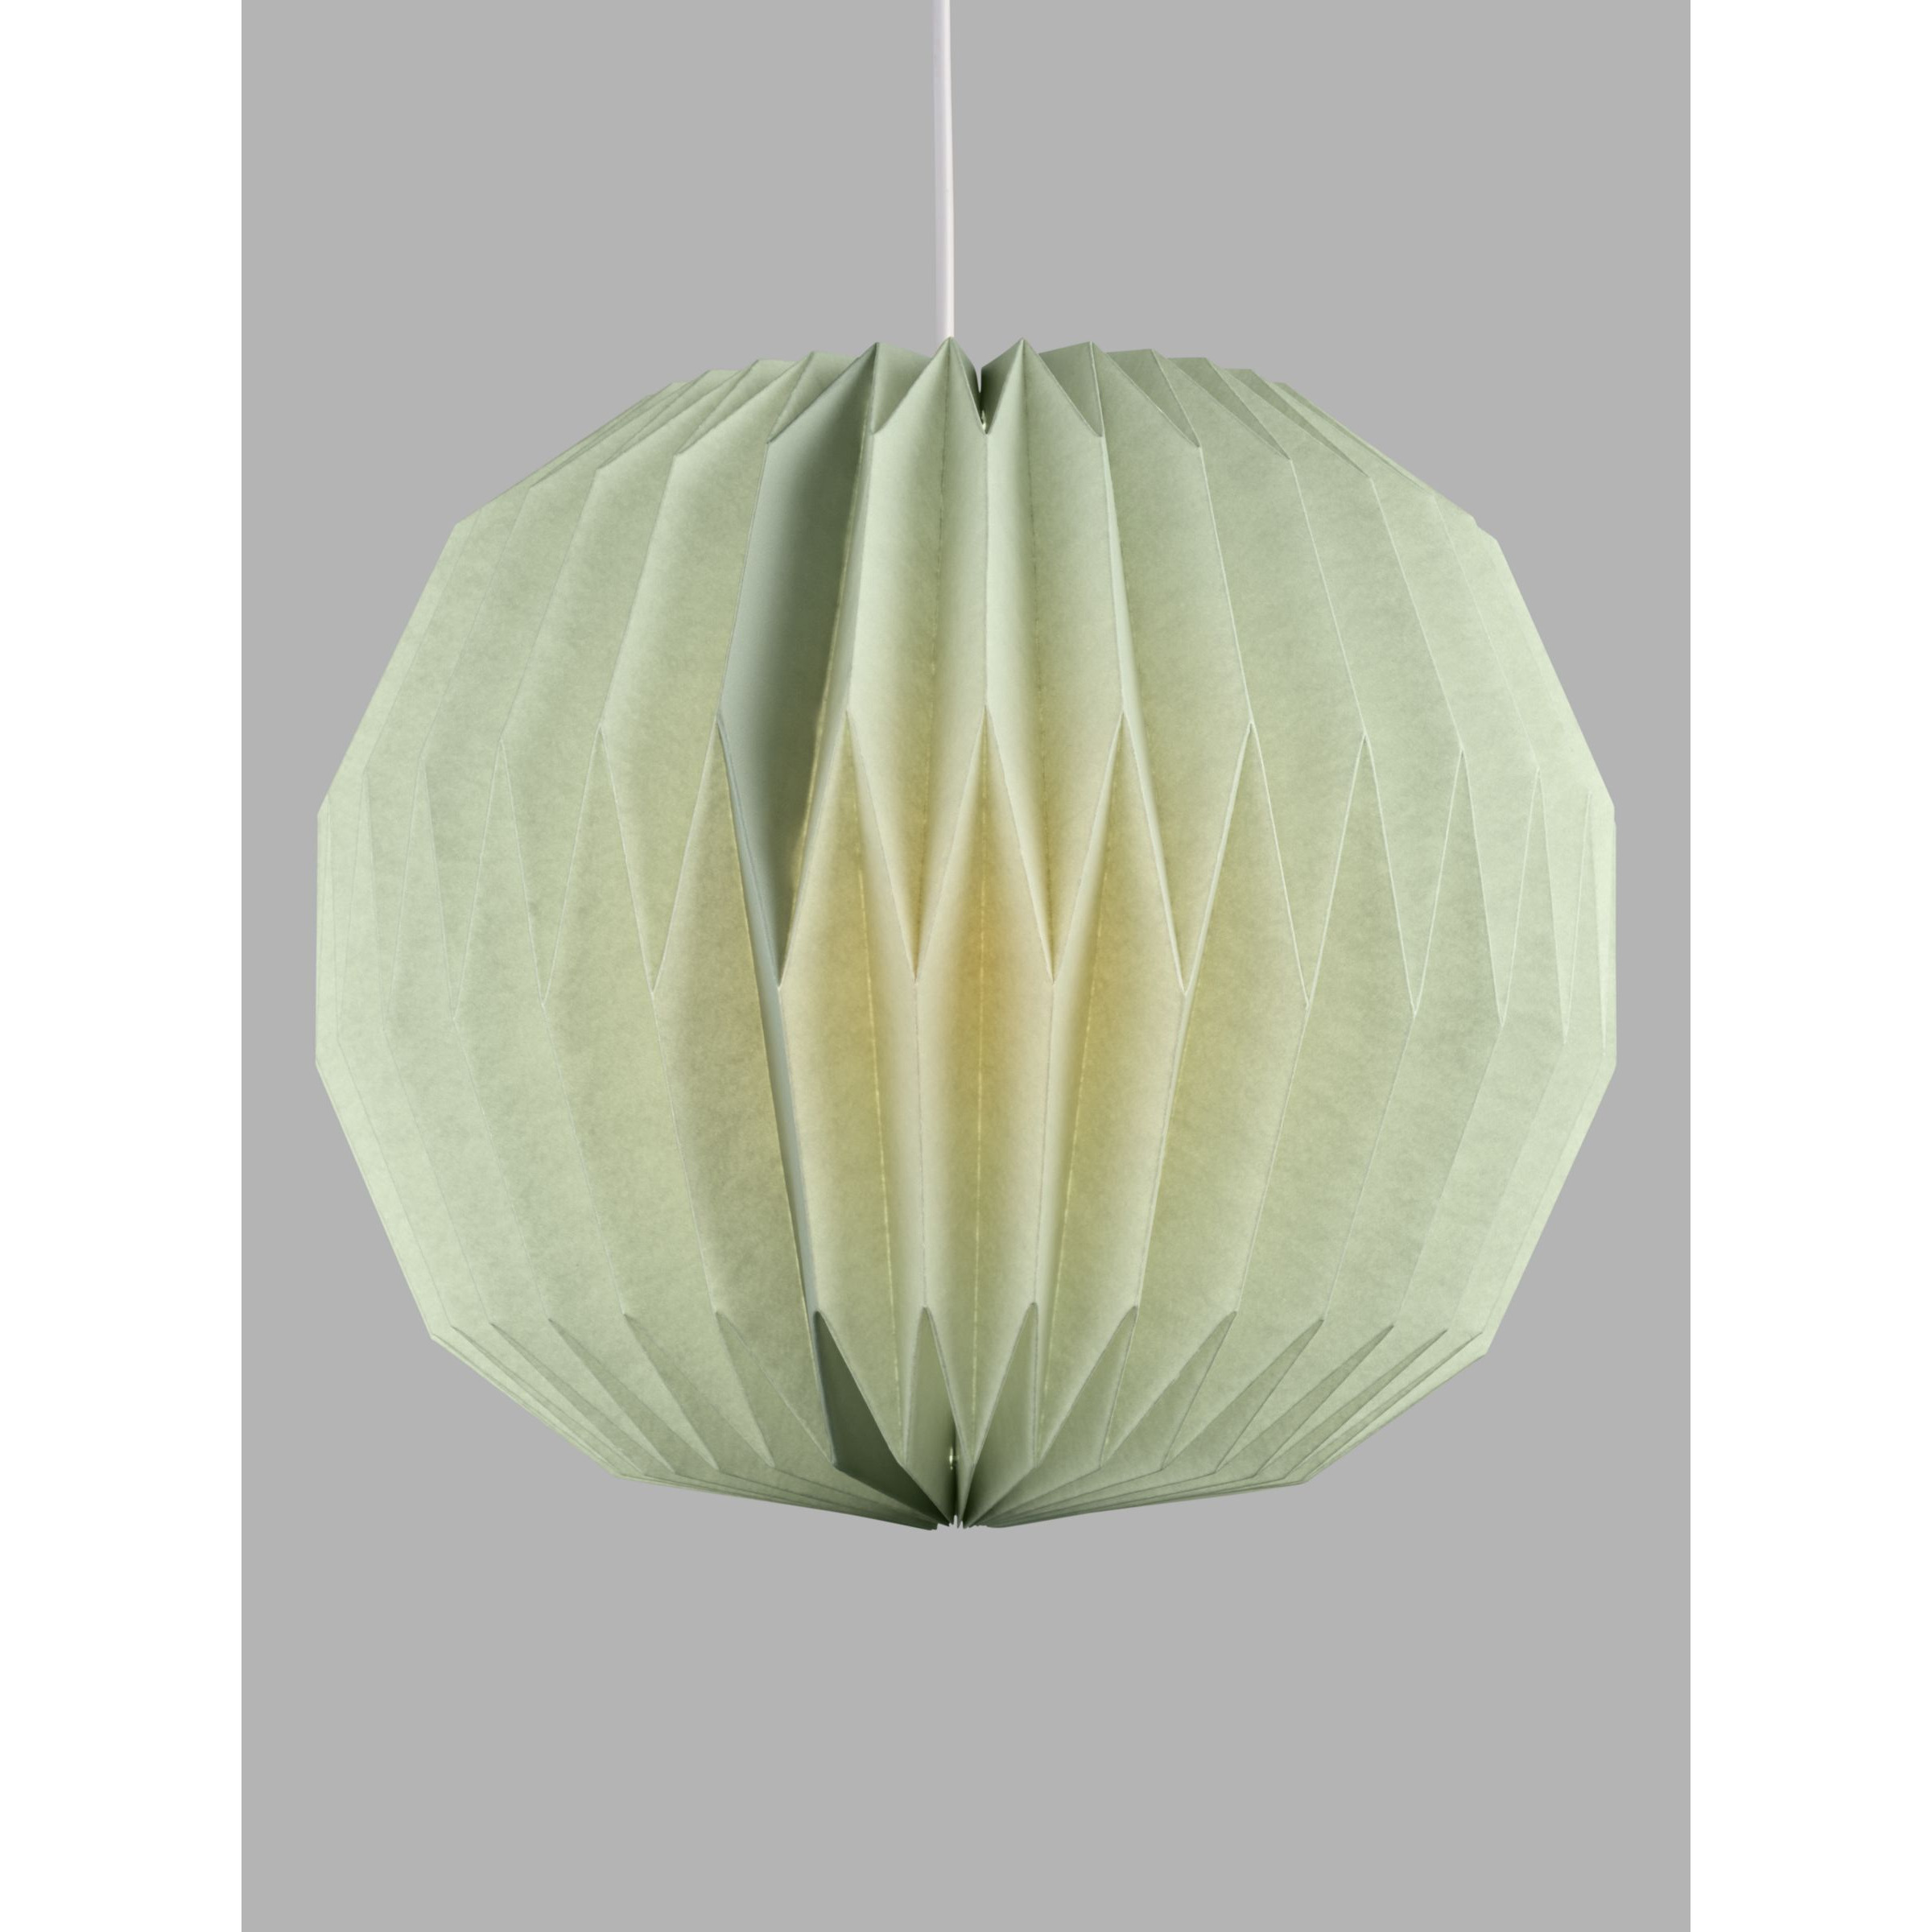 John Lewis ANYDAY Issie Easy-to-Fit Paper Ceiling Shade - image 1